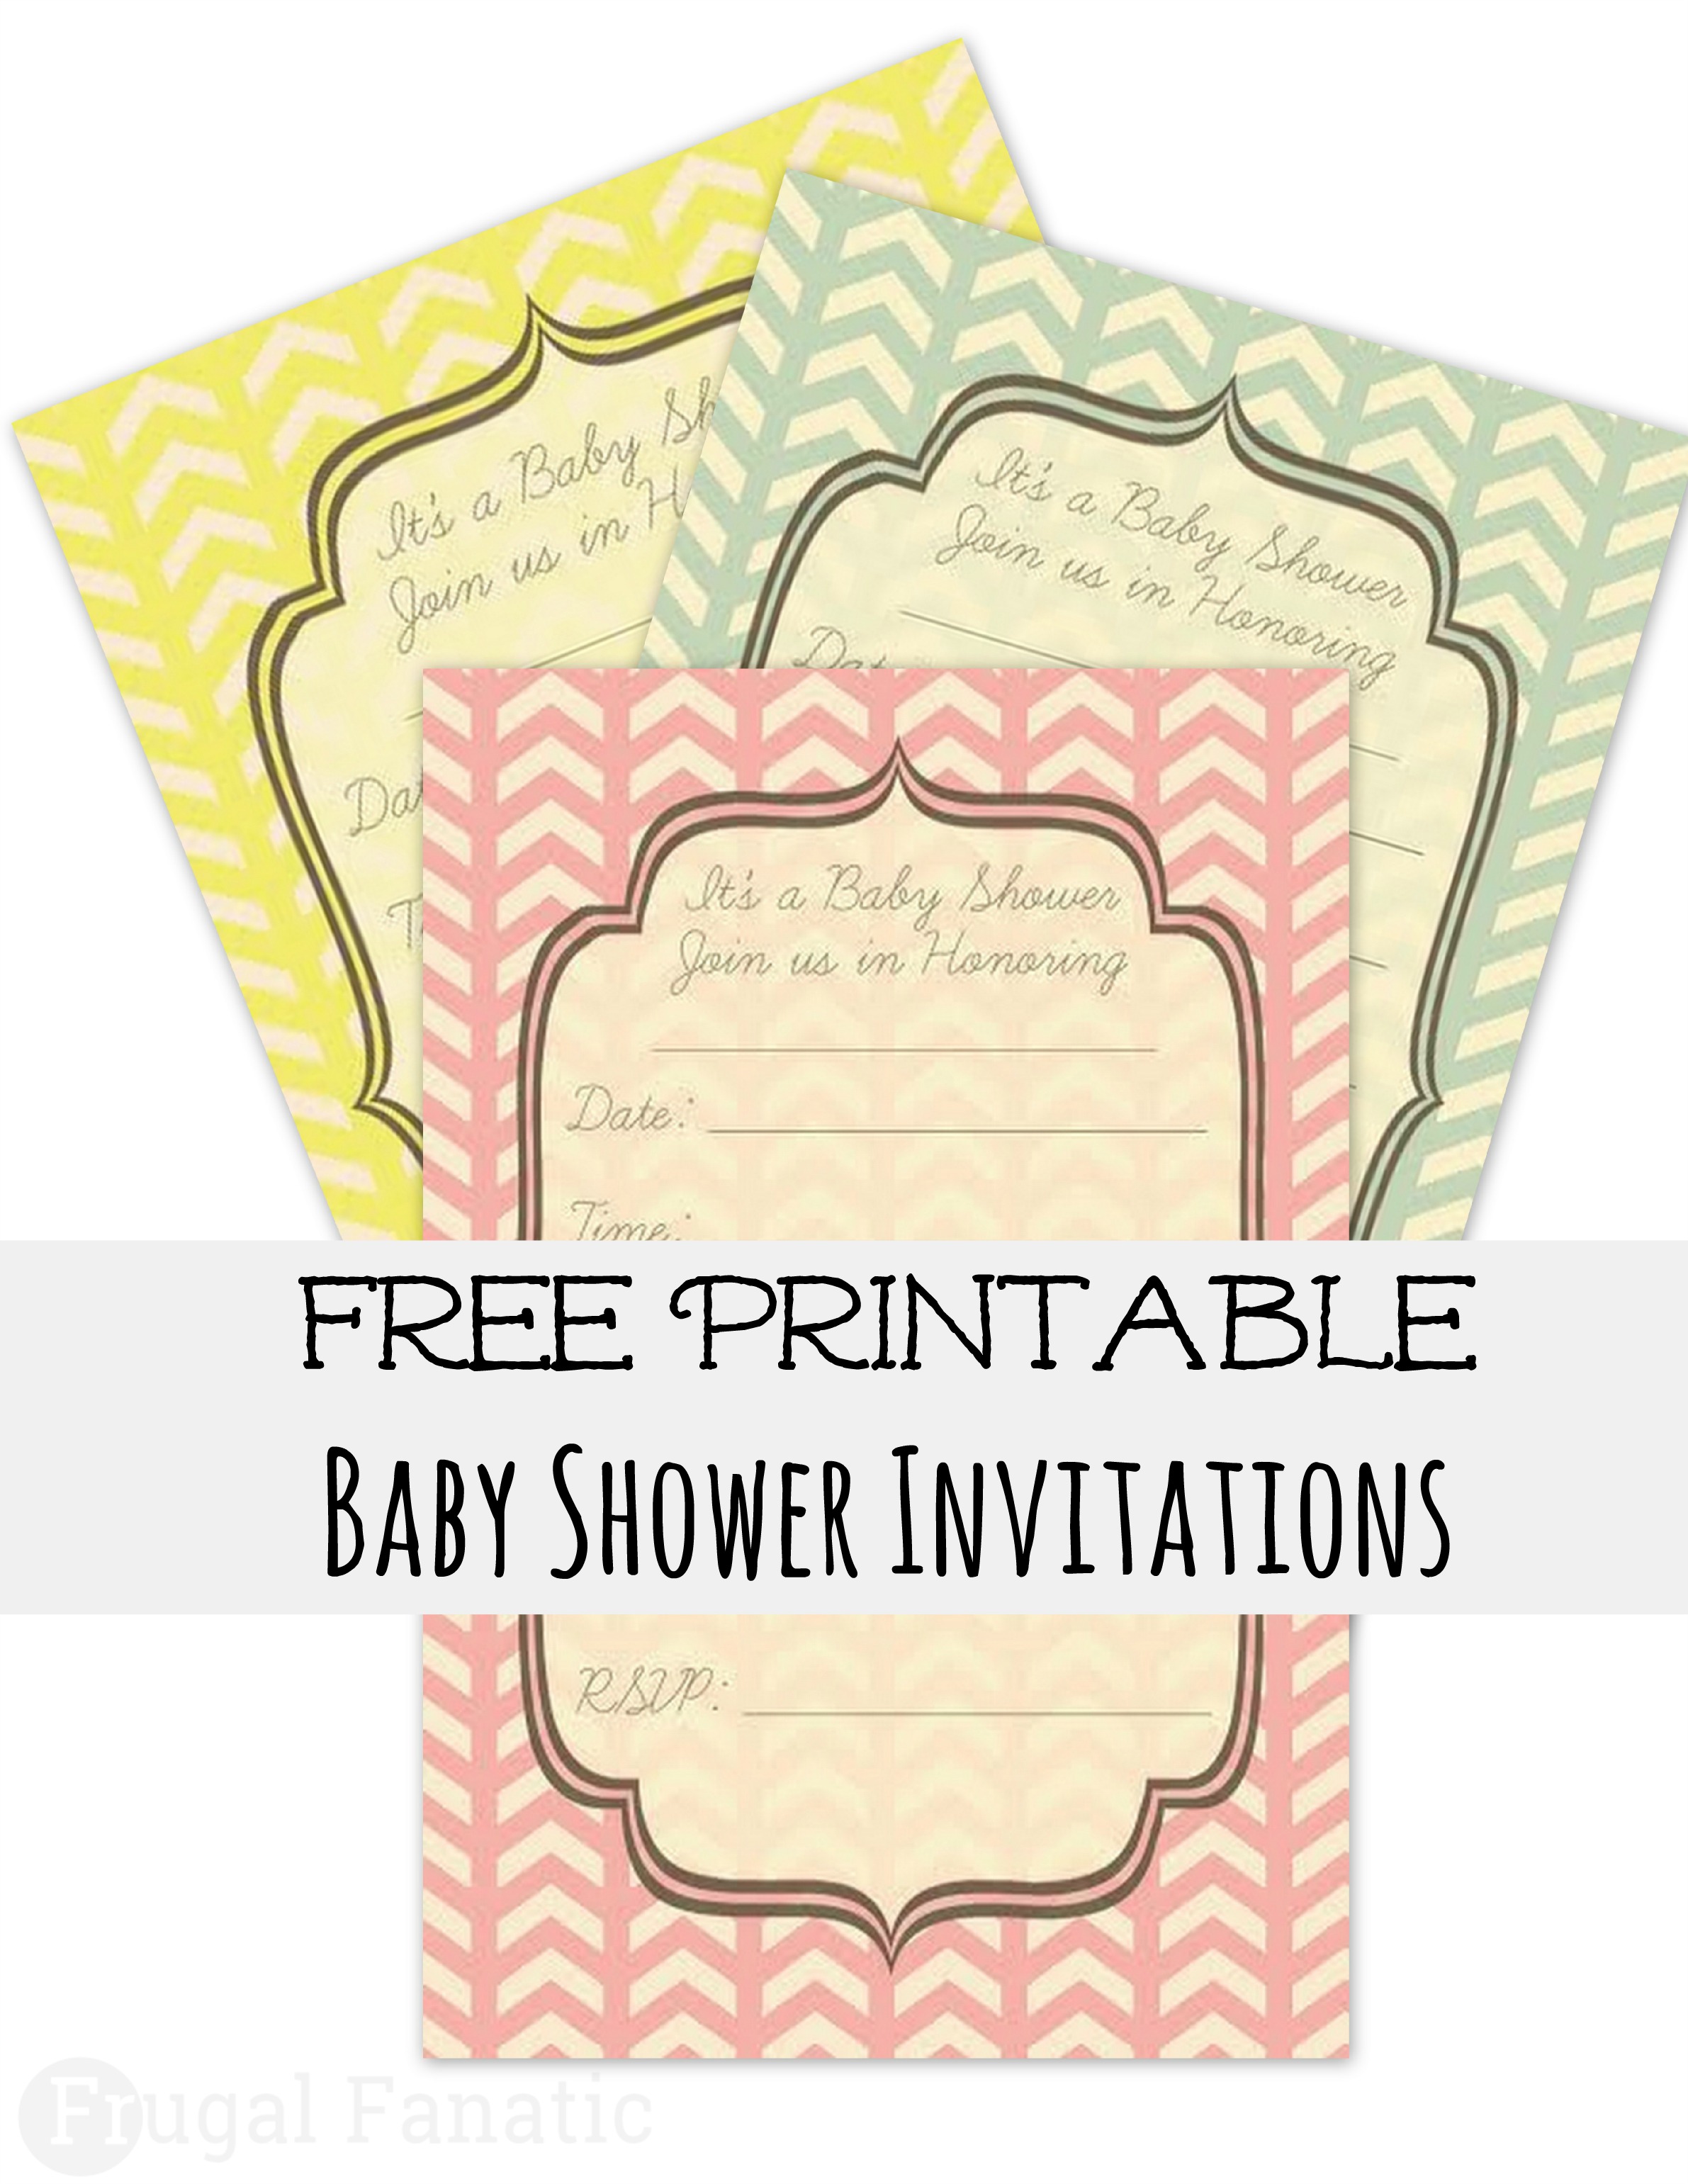 7-best-images-of-free-printable-baby-shower-inv-free-printable-baby